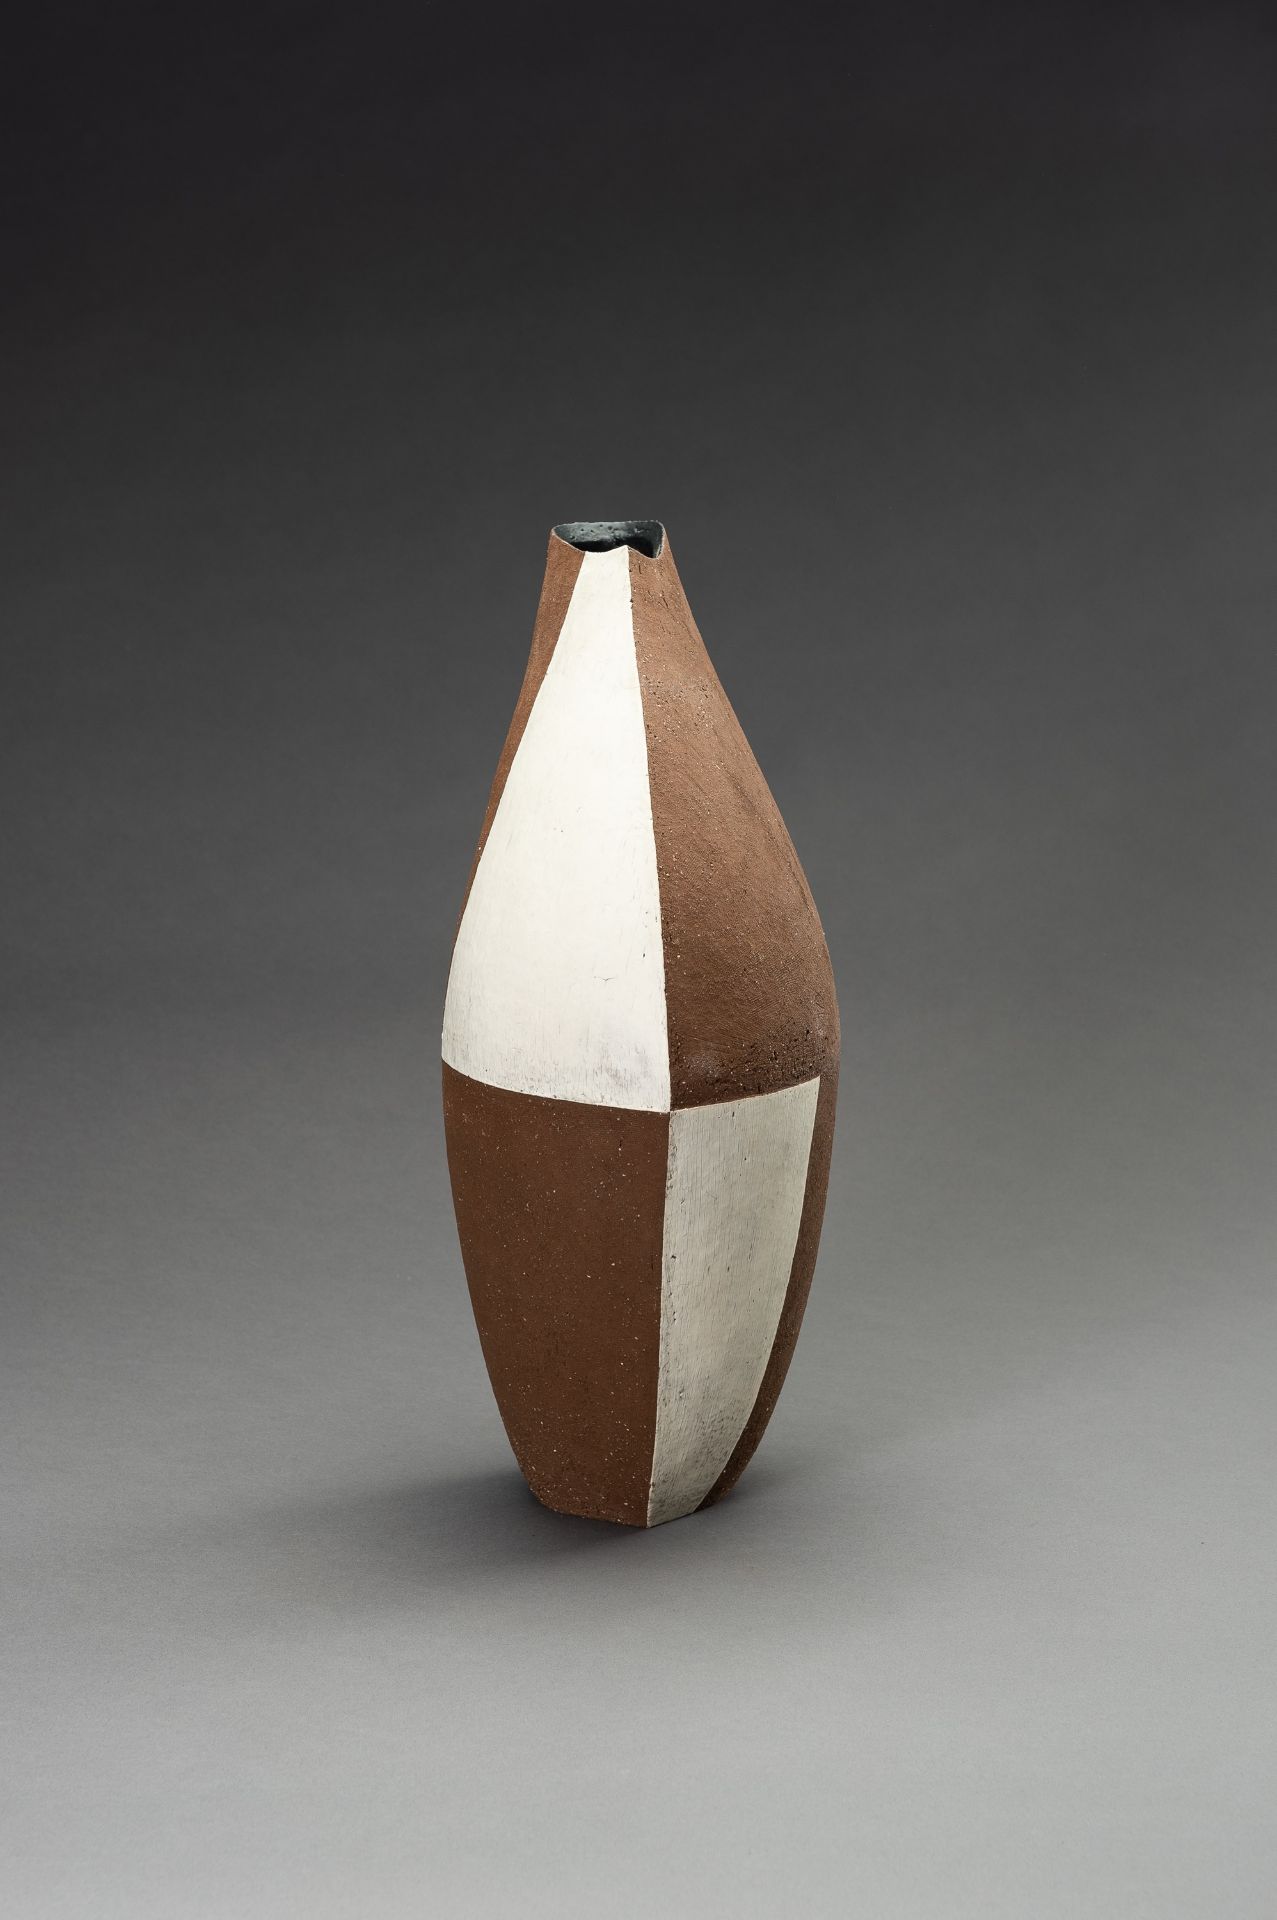 MASA TOSHI: A CONTEMPORARY LACQUERED CERAMIC VASE - Image 4 of 11